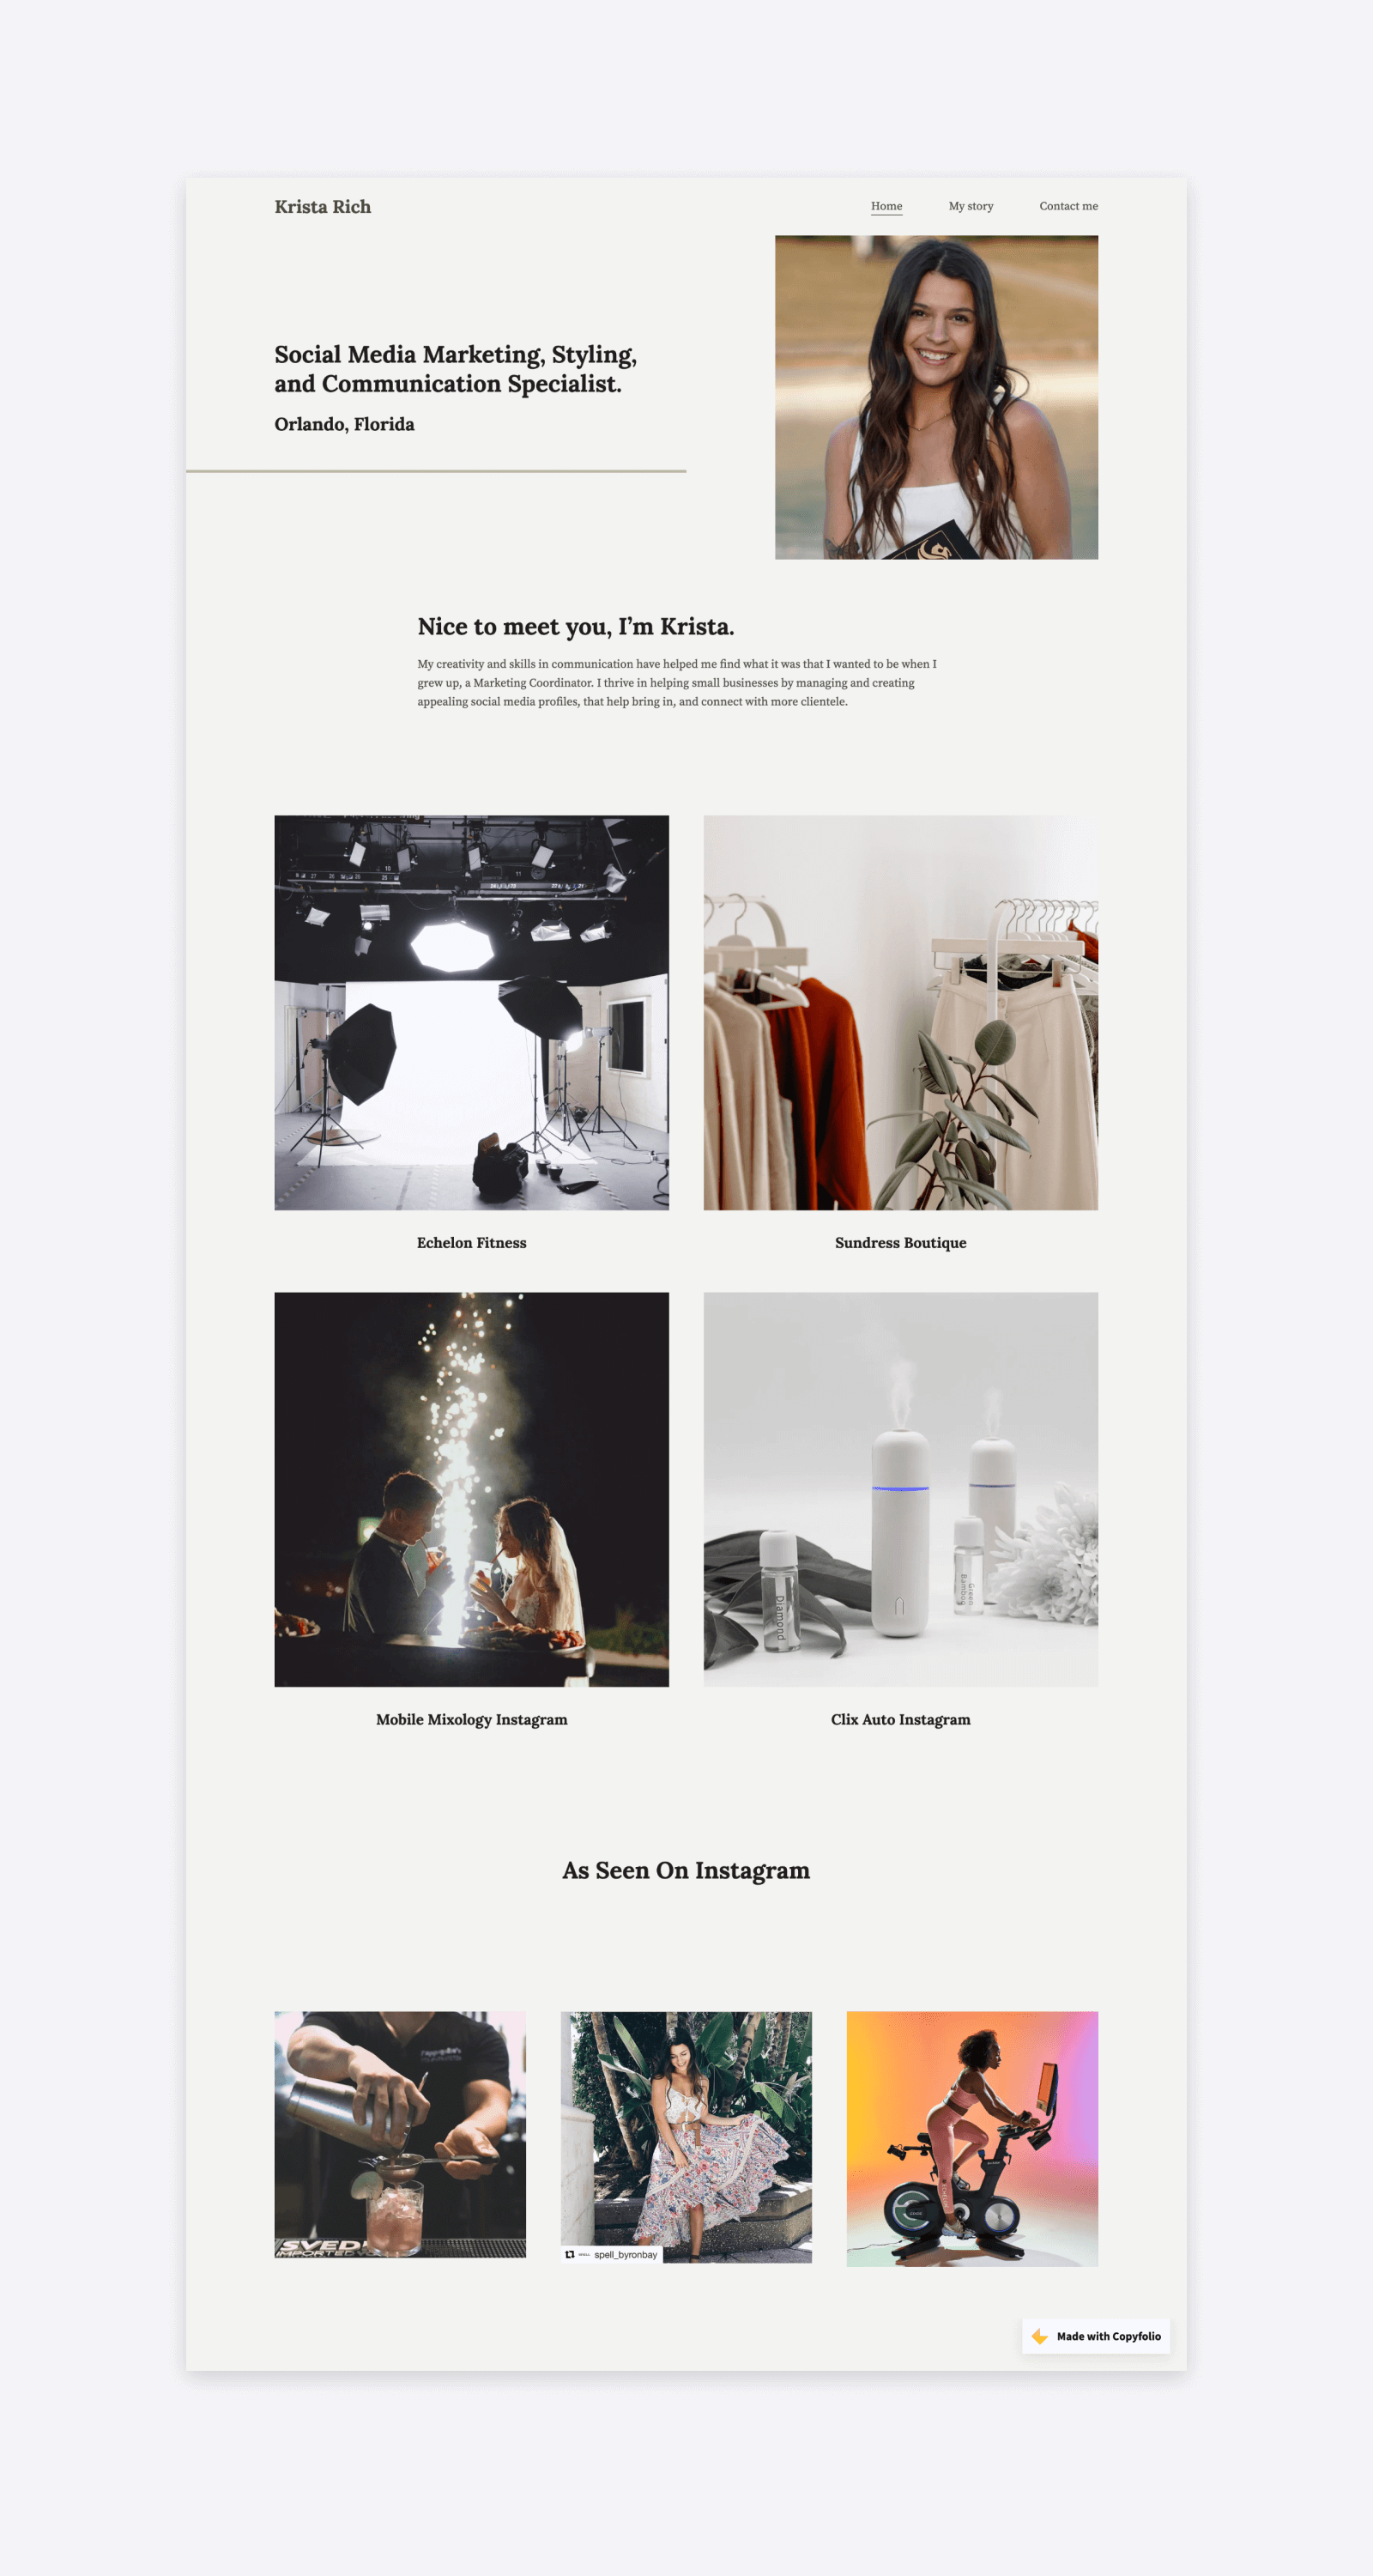 Krista Rich's portfolio website, showcasing her marketing projects, divided into categories